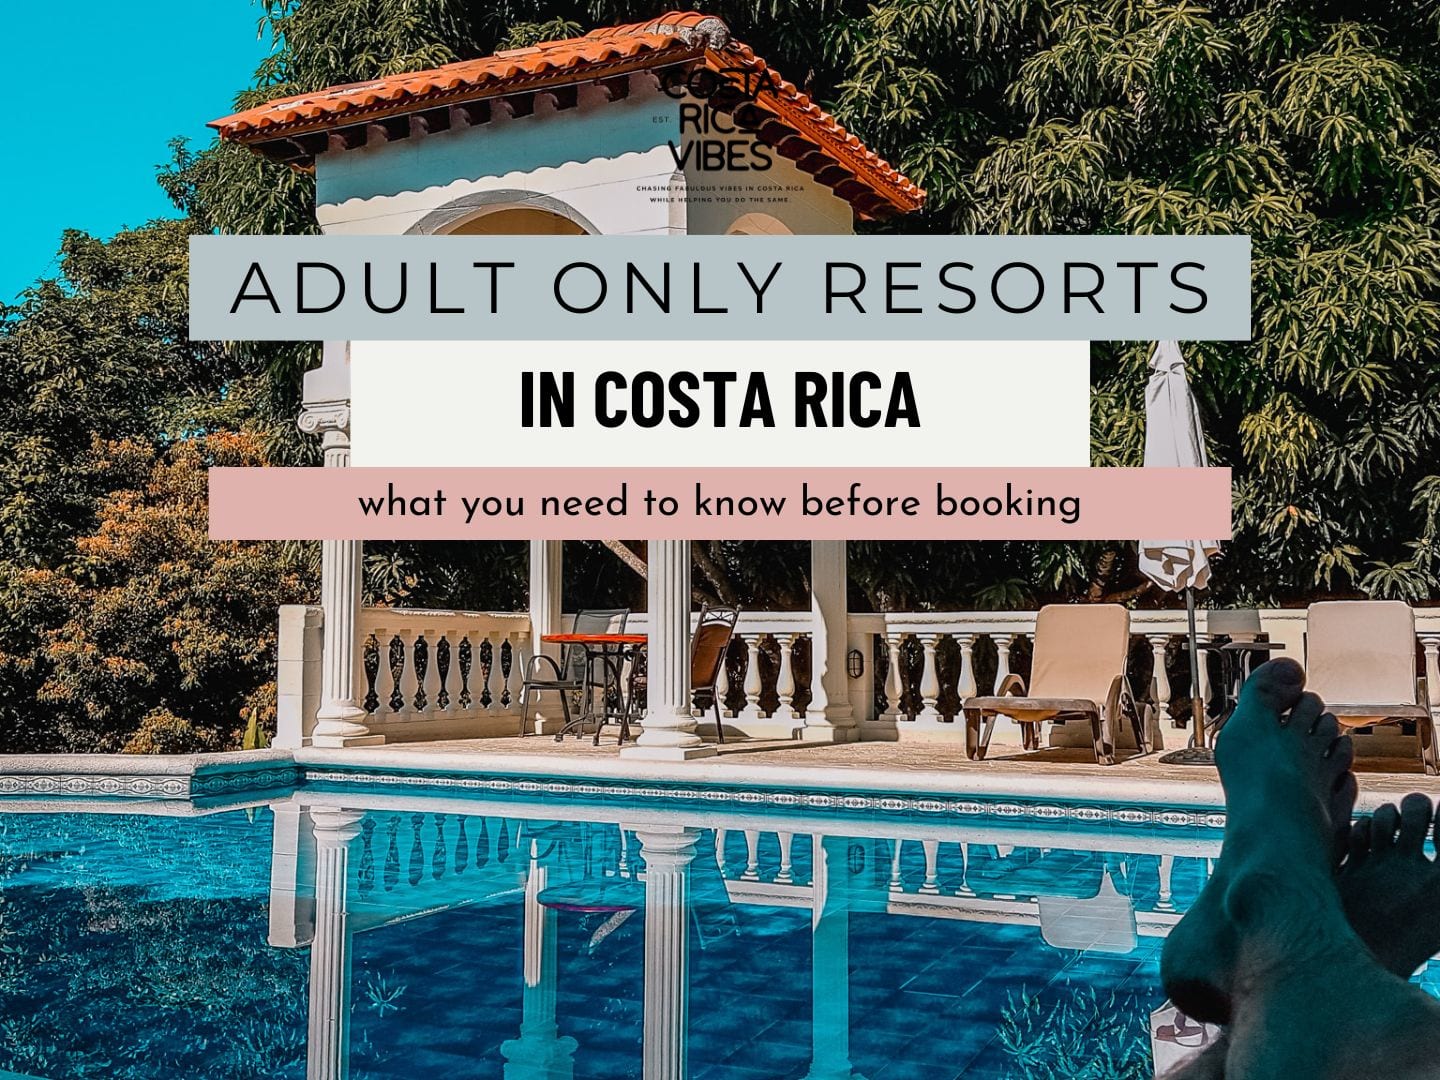 Adult Only Resorts in Costa Rica